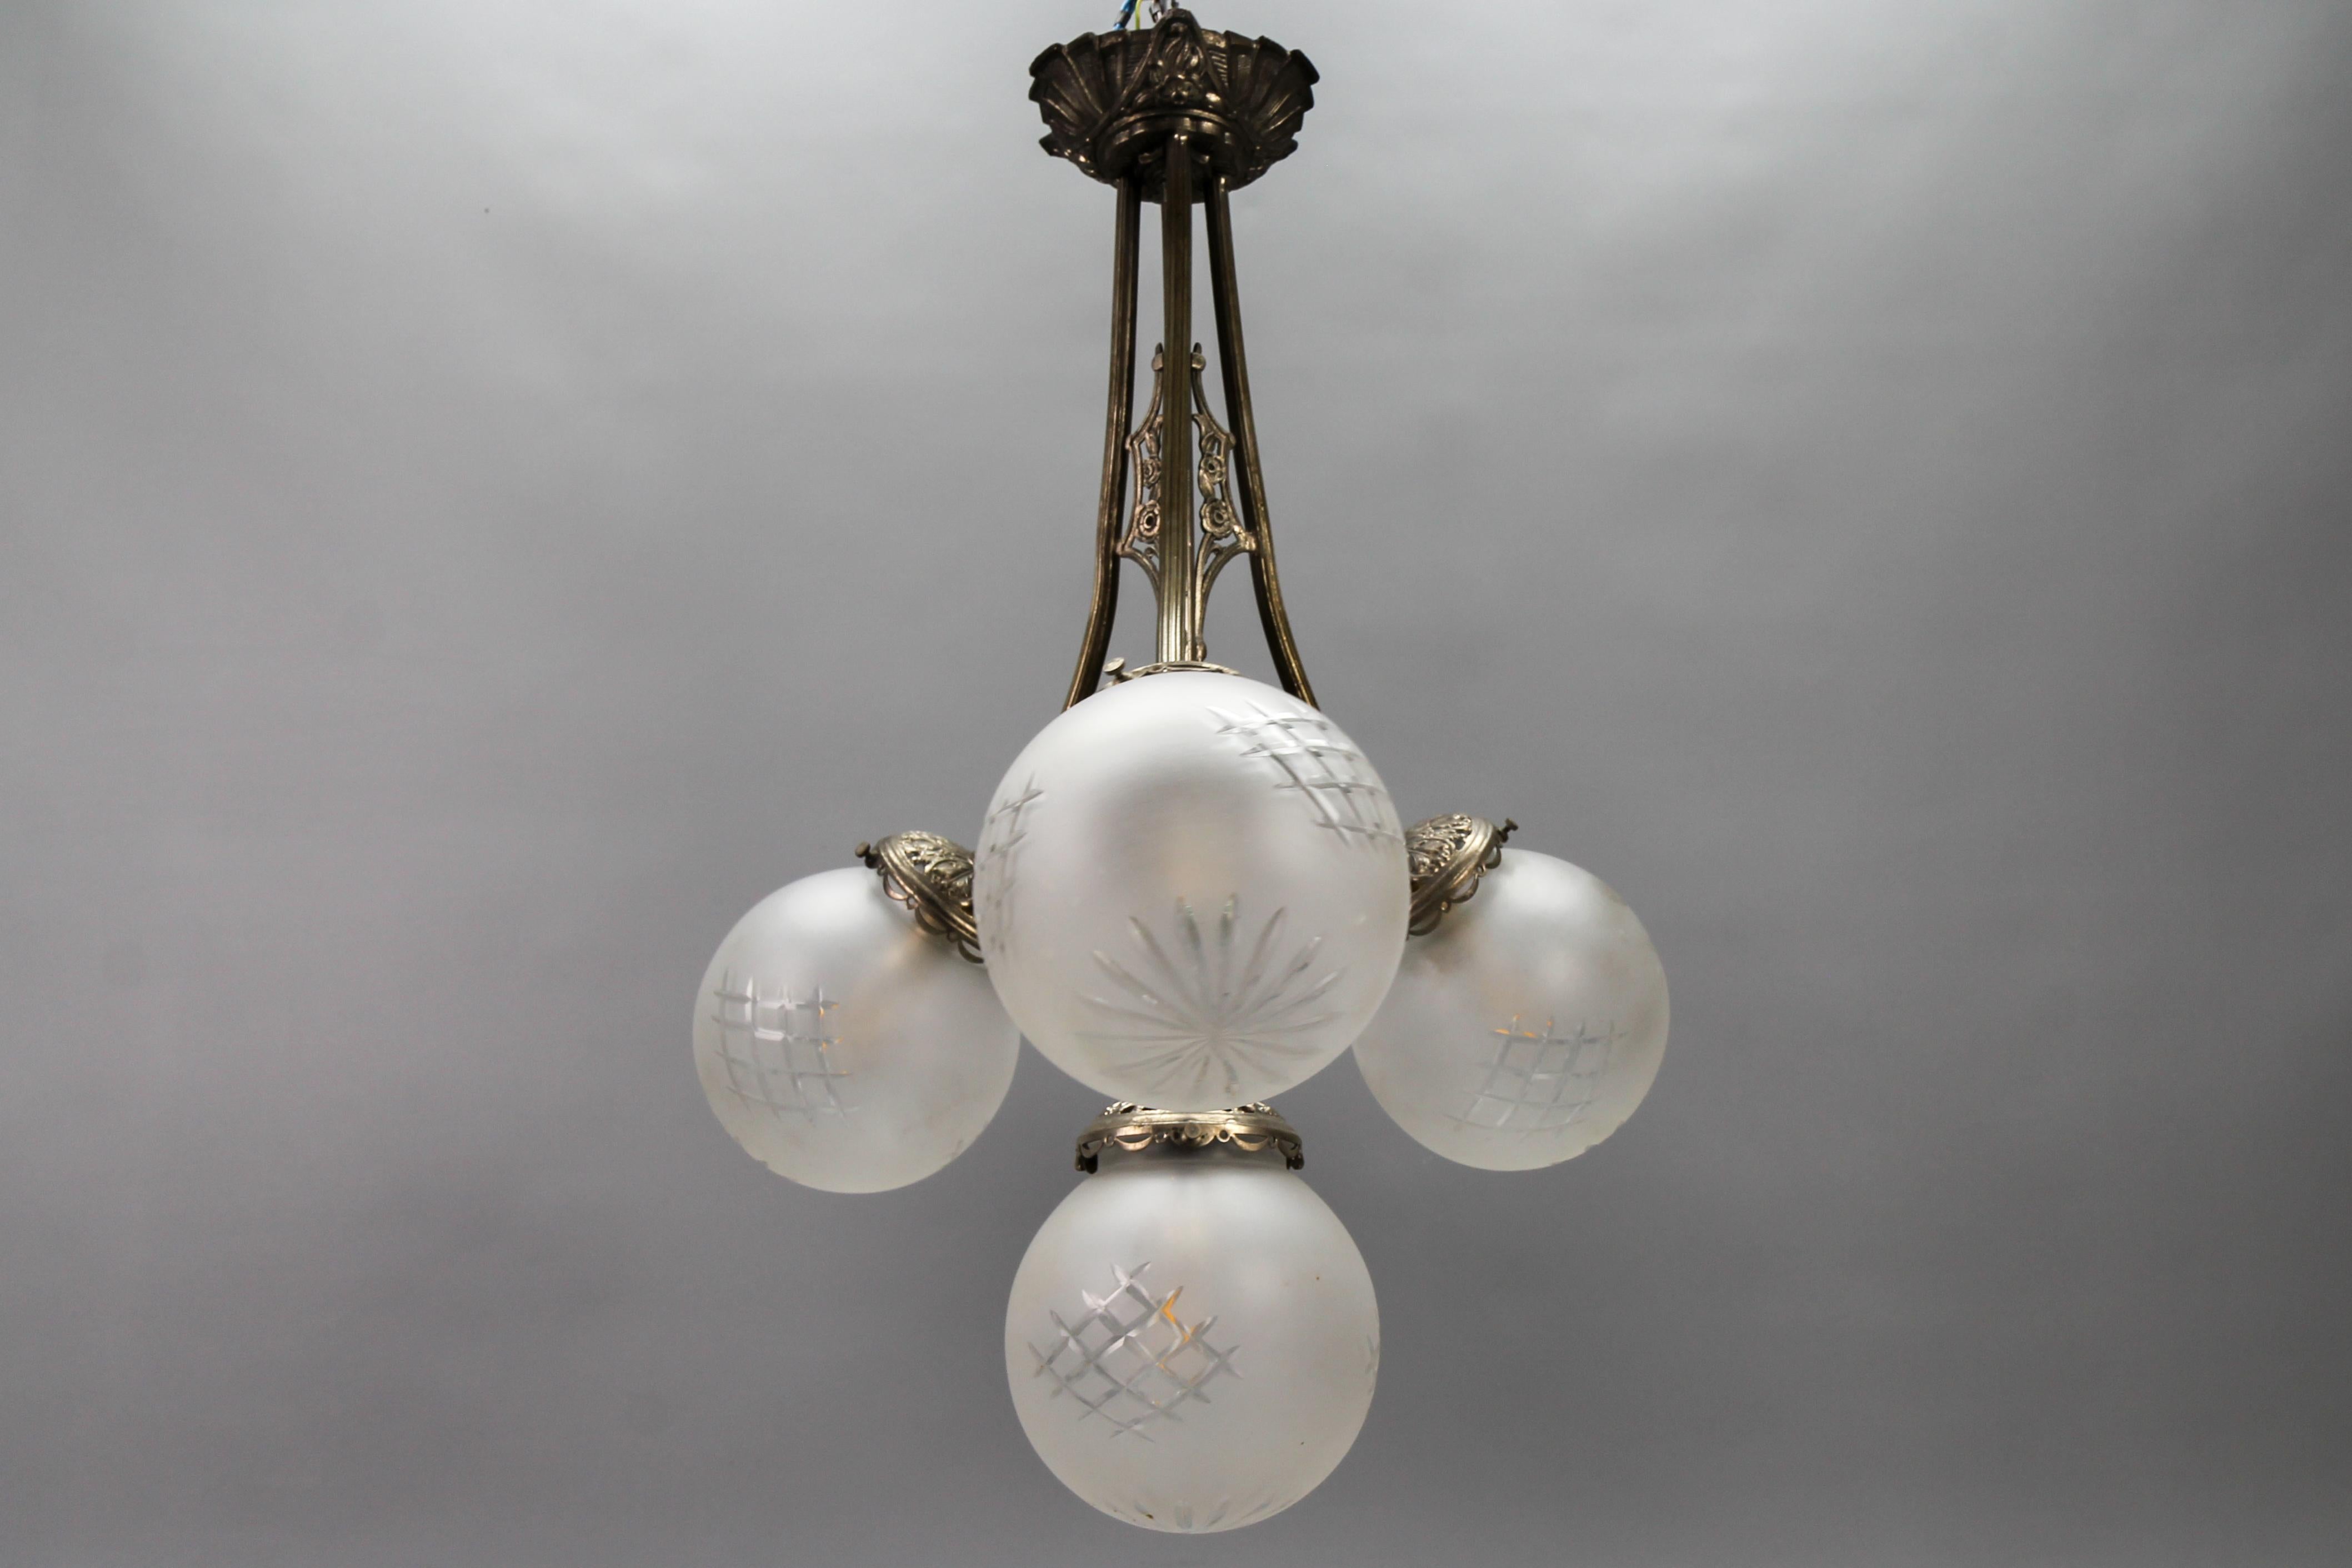 French Art Deco Four-Light Brass and Frosted Cut Glass Globes Pendant Chandelier For Sale 2